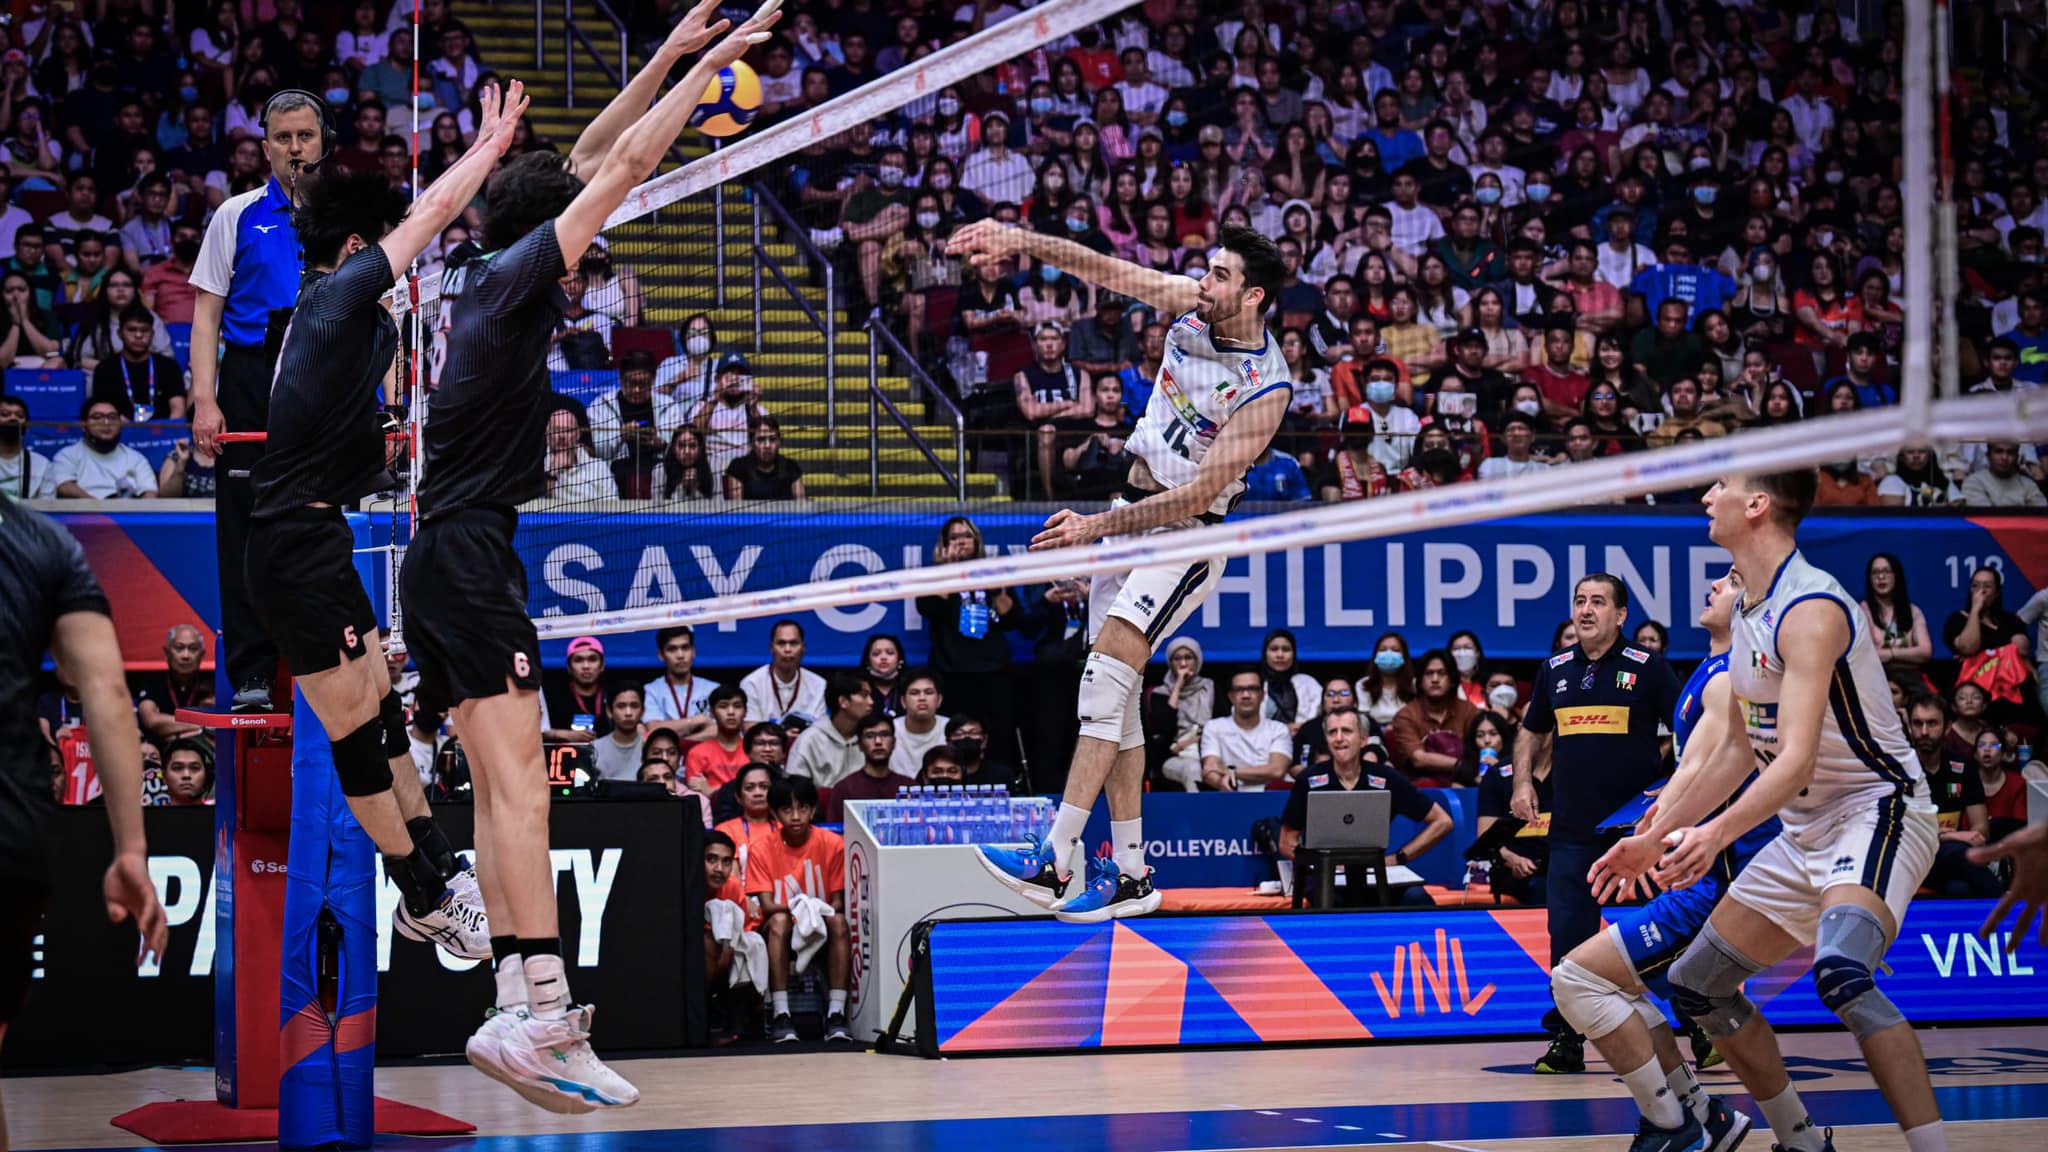 JAPAN SUFFER FIRST DEFEAT IN VNL 2023